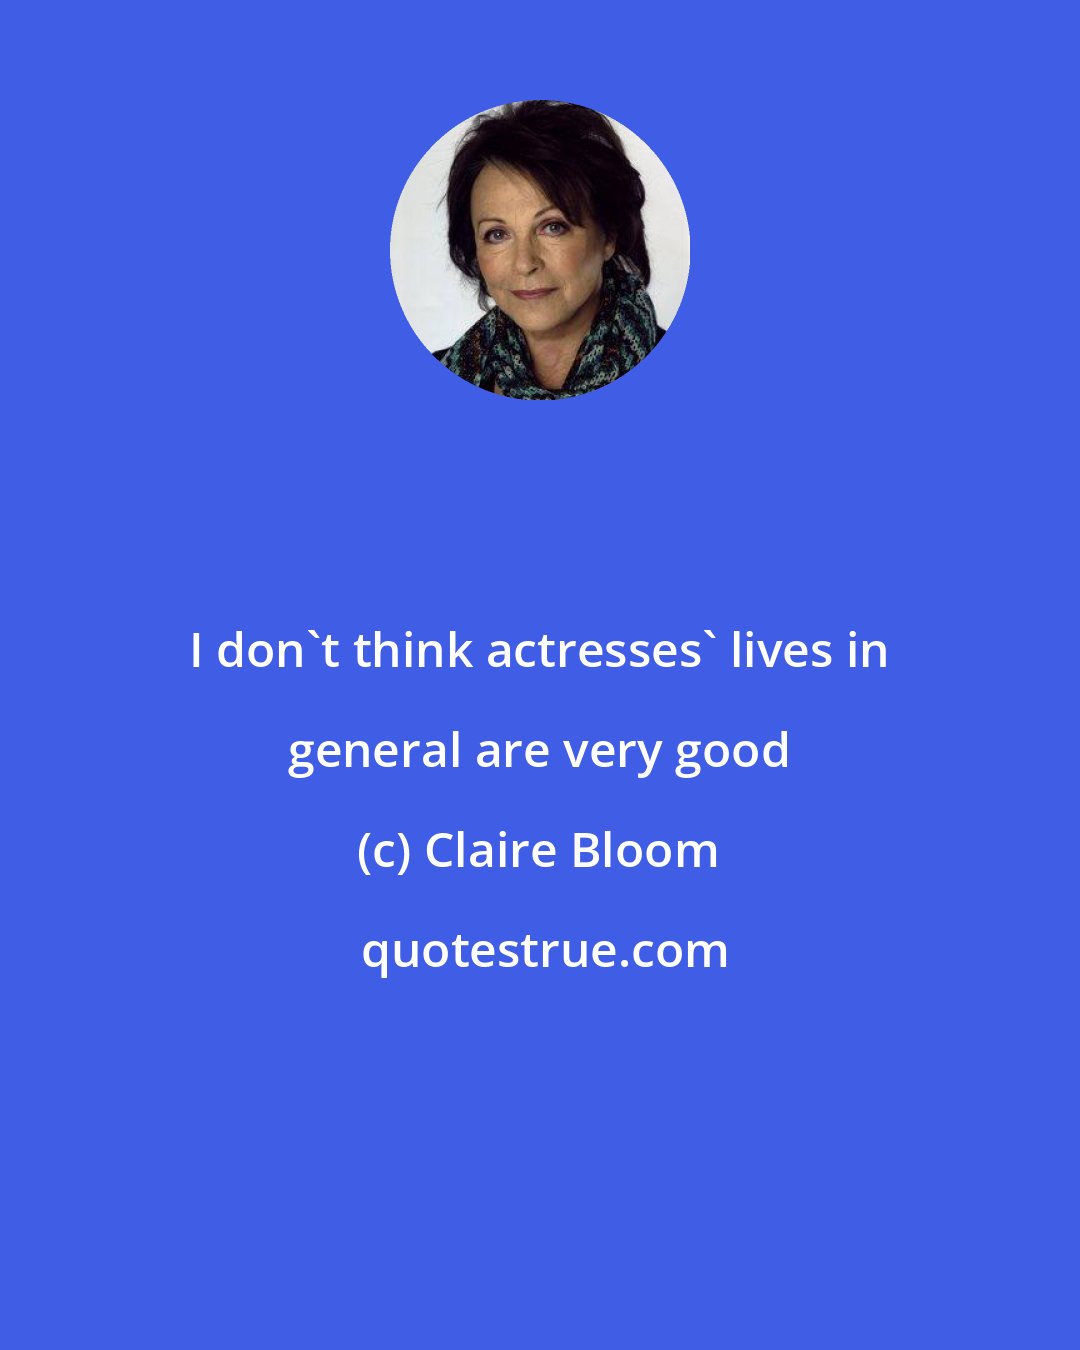 Claire Bloom: I don't think actresses' lives in general are very good